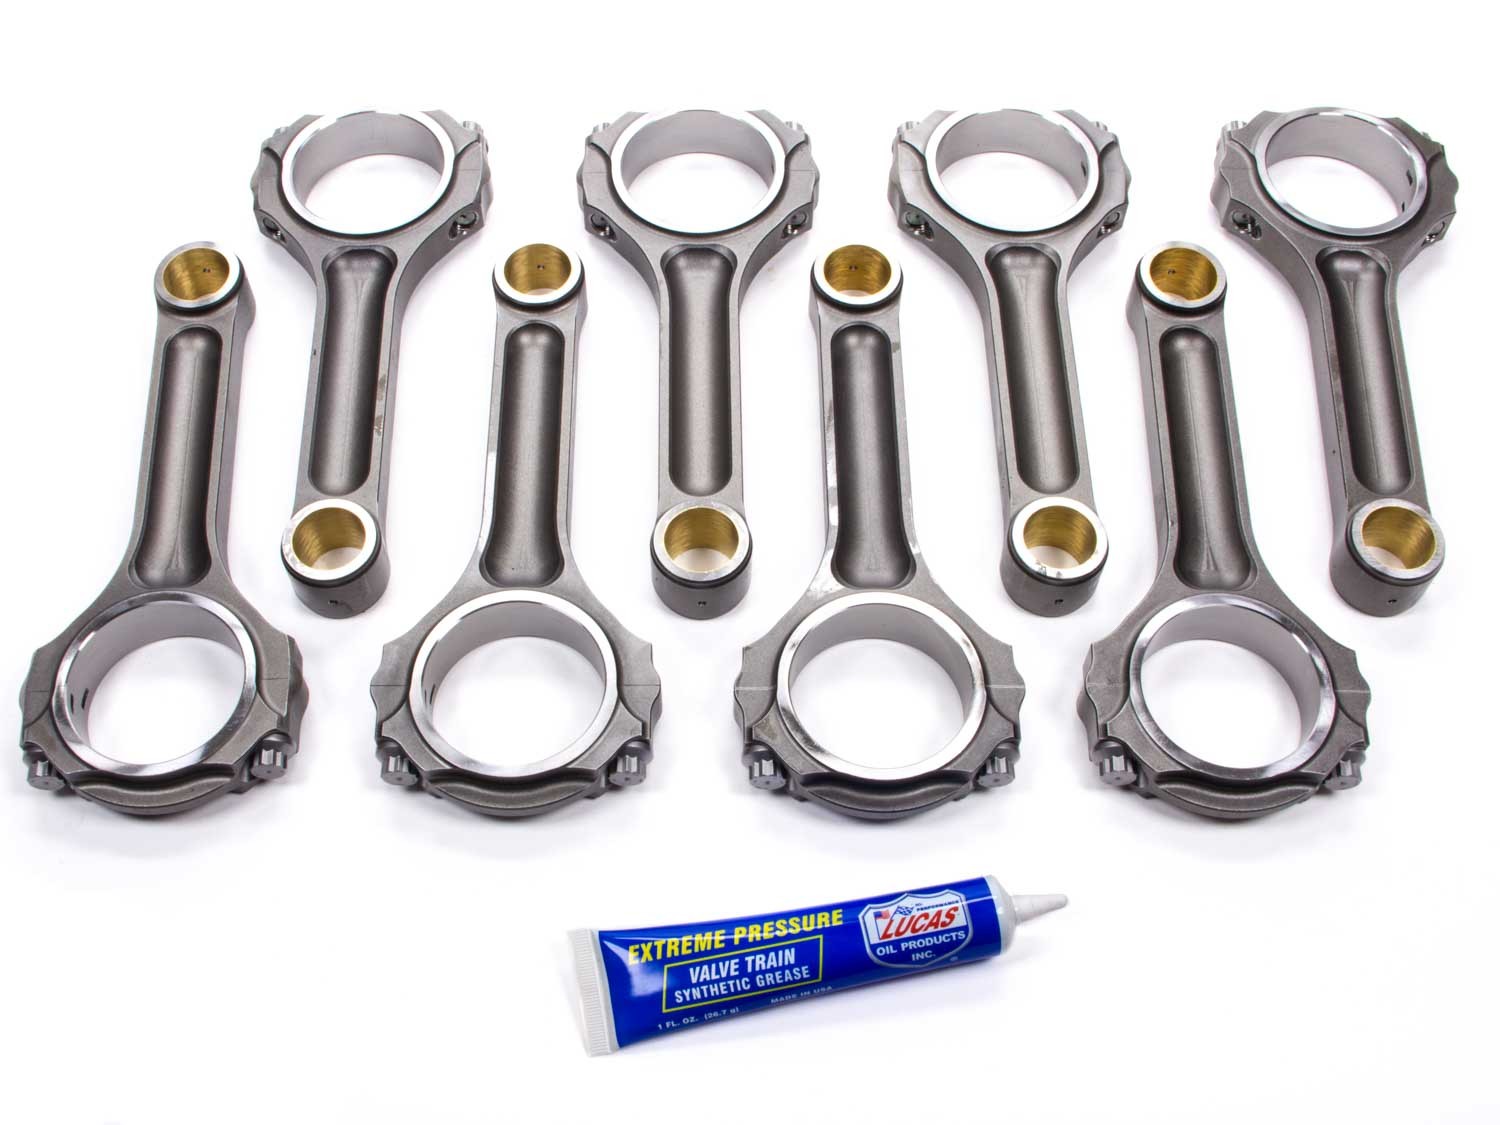 Oliver Rods C6800BBMX8 - Connecting Rod, Big Block-Max, I Beam, 6.800 in Long, Bushed, 7/16 in Cap Screws, Forged Steel, Big Block Chevy, Set of 8